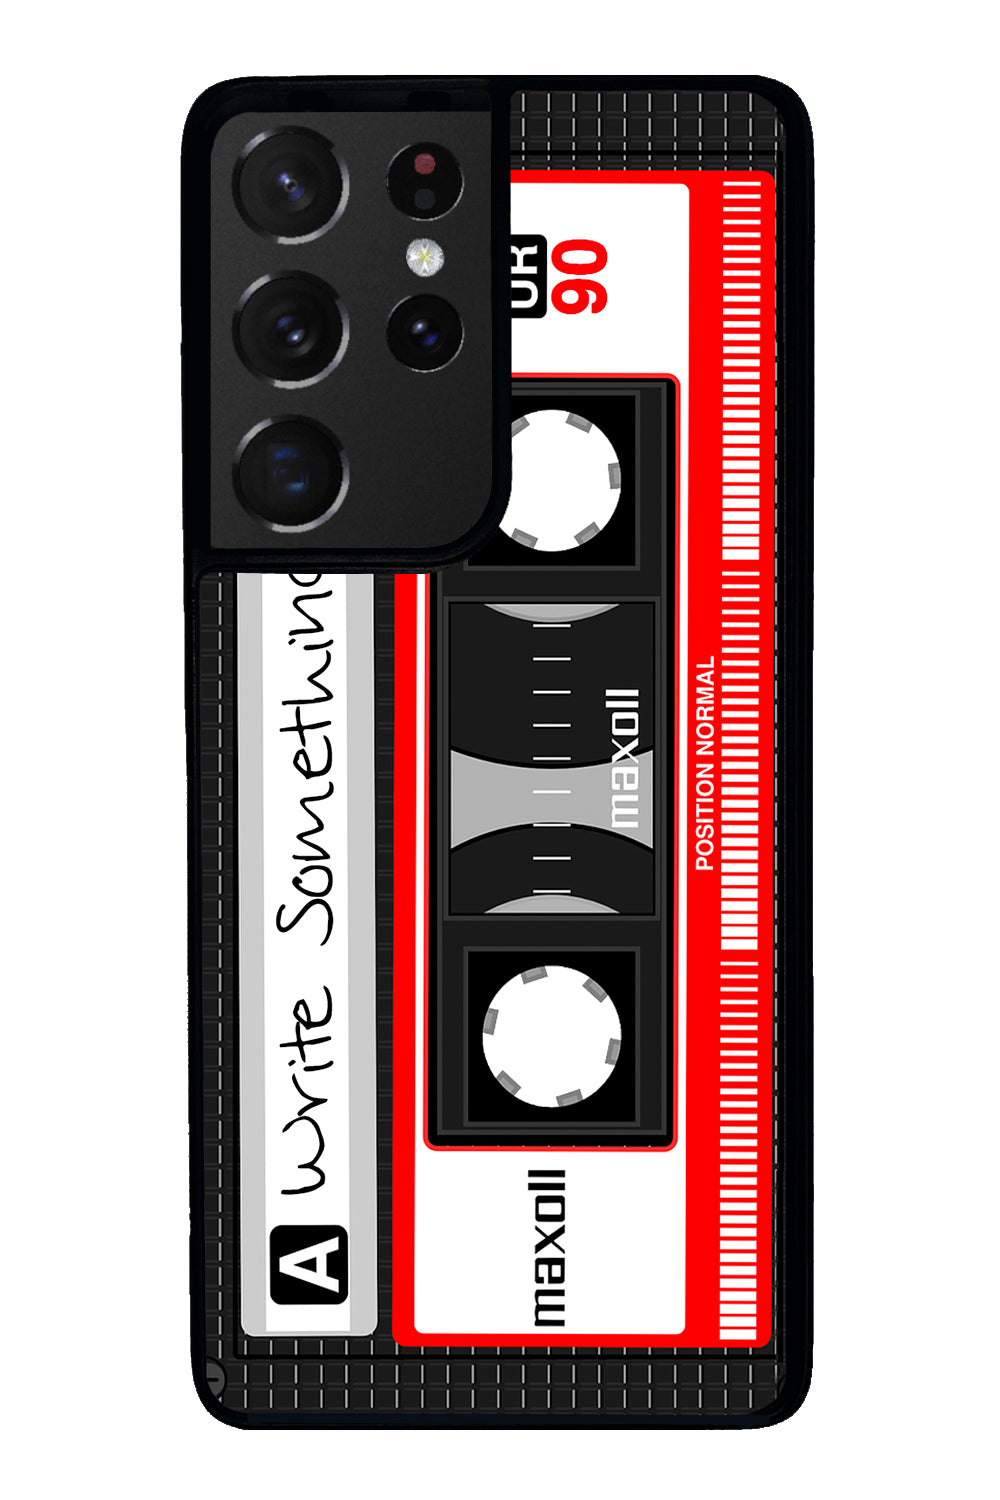 Cassette Tape Iphone Wallpapers